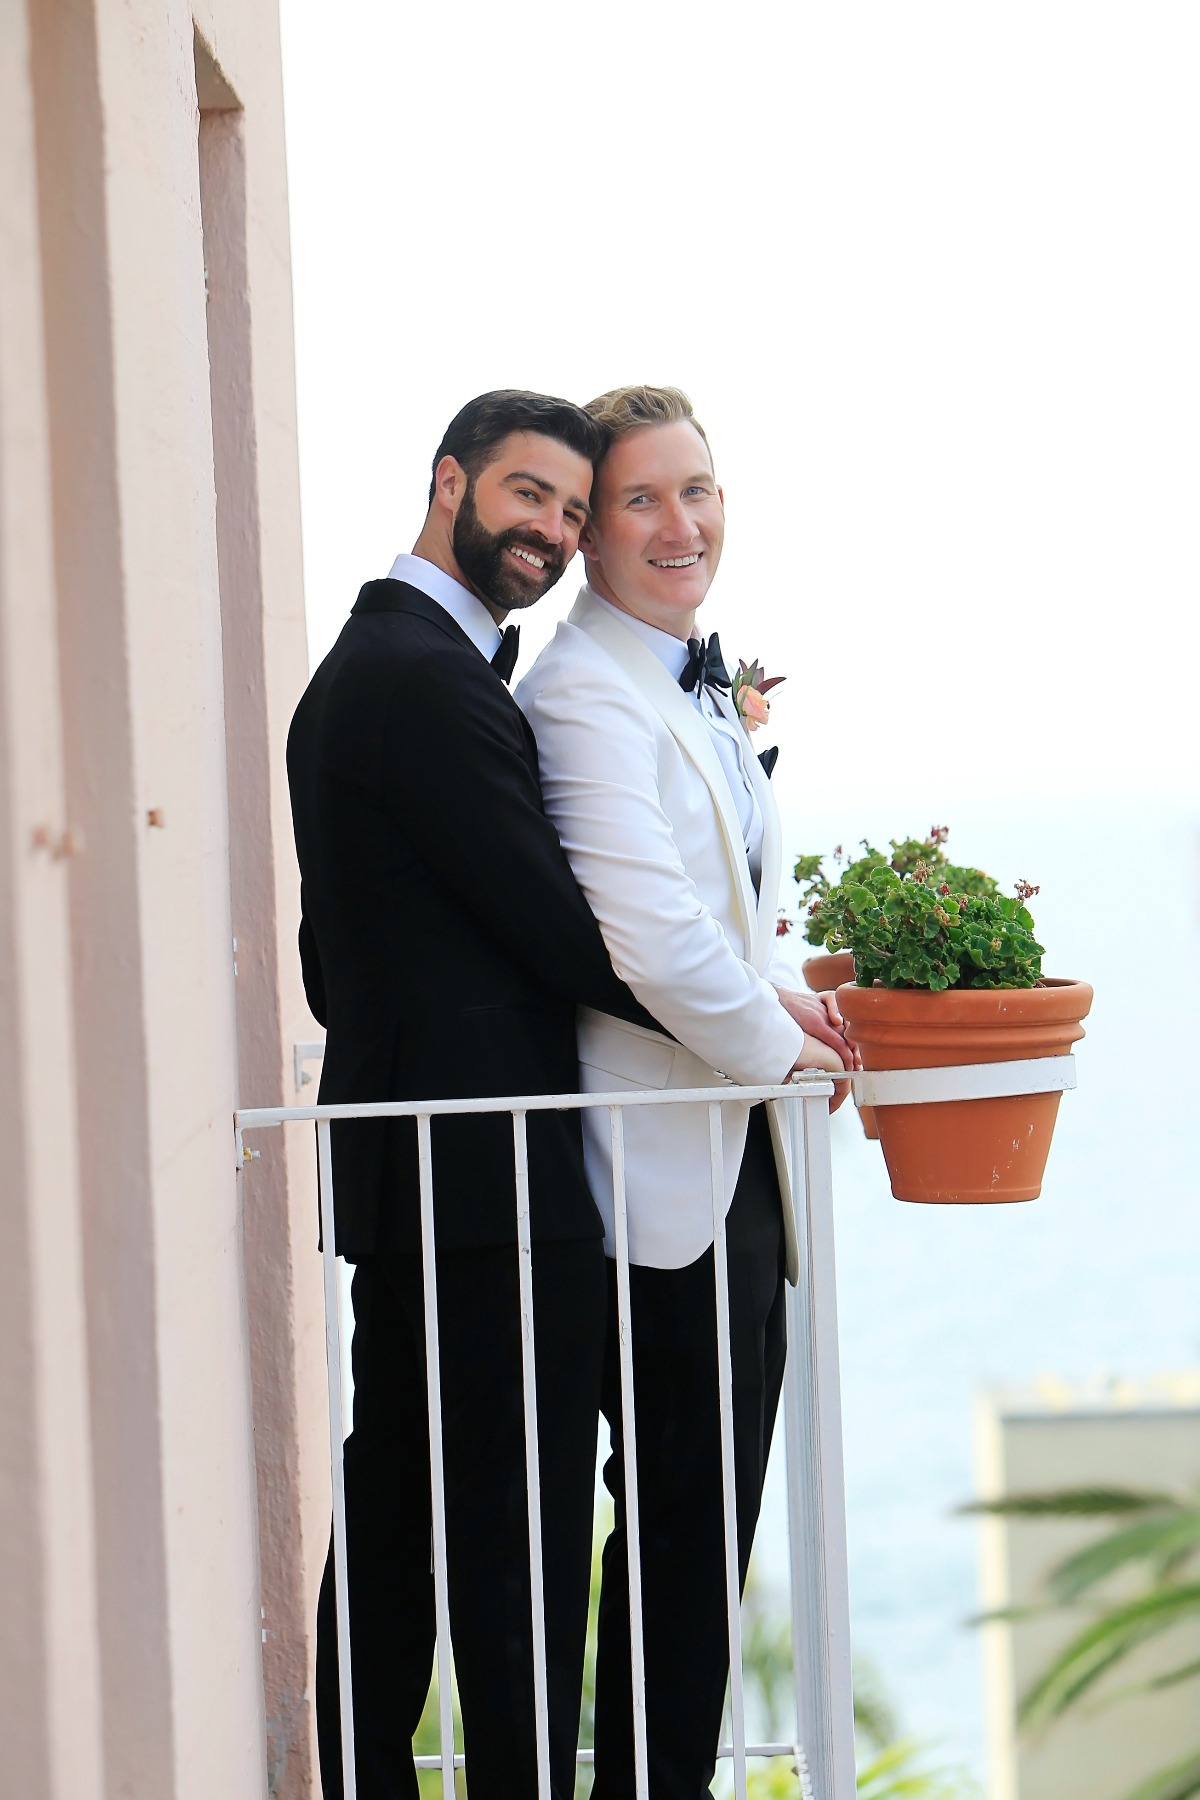 These two grooms rocked their San Diego wedding with a tropical disco theme